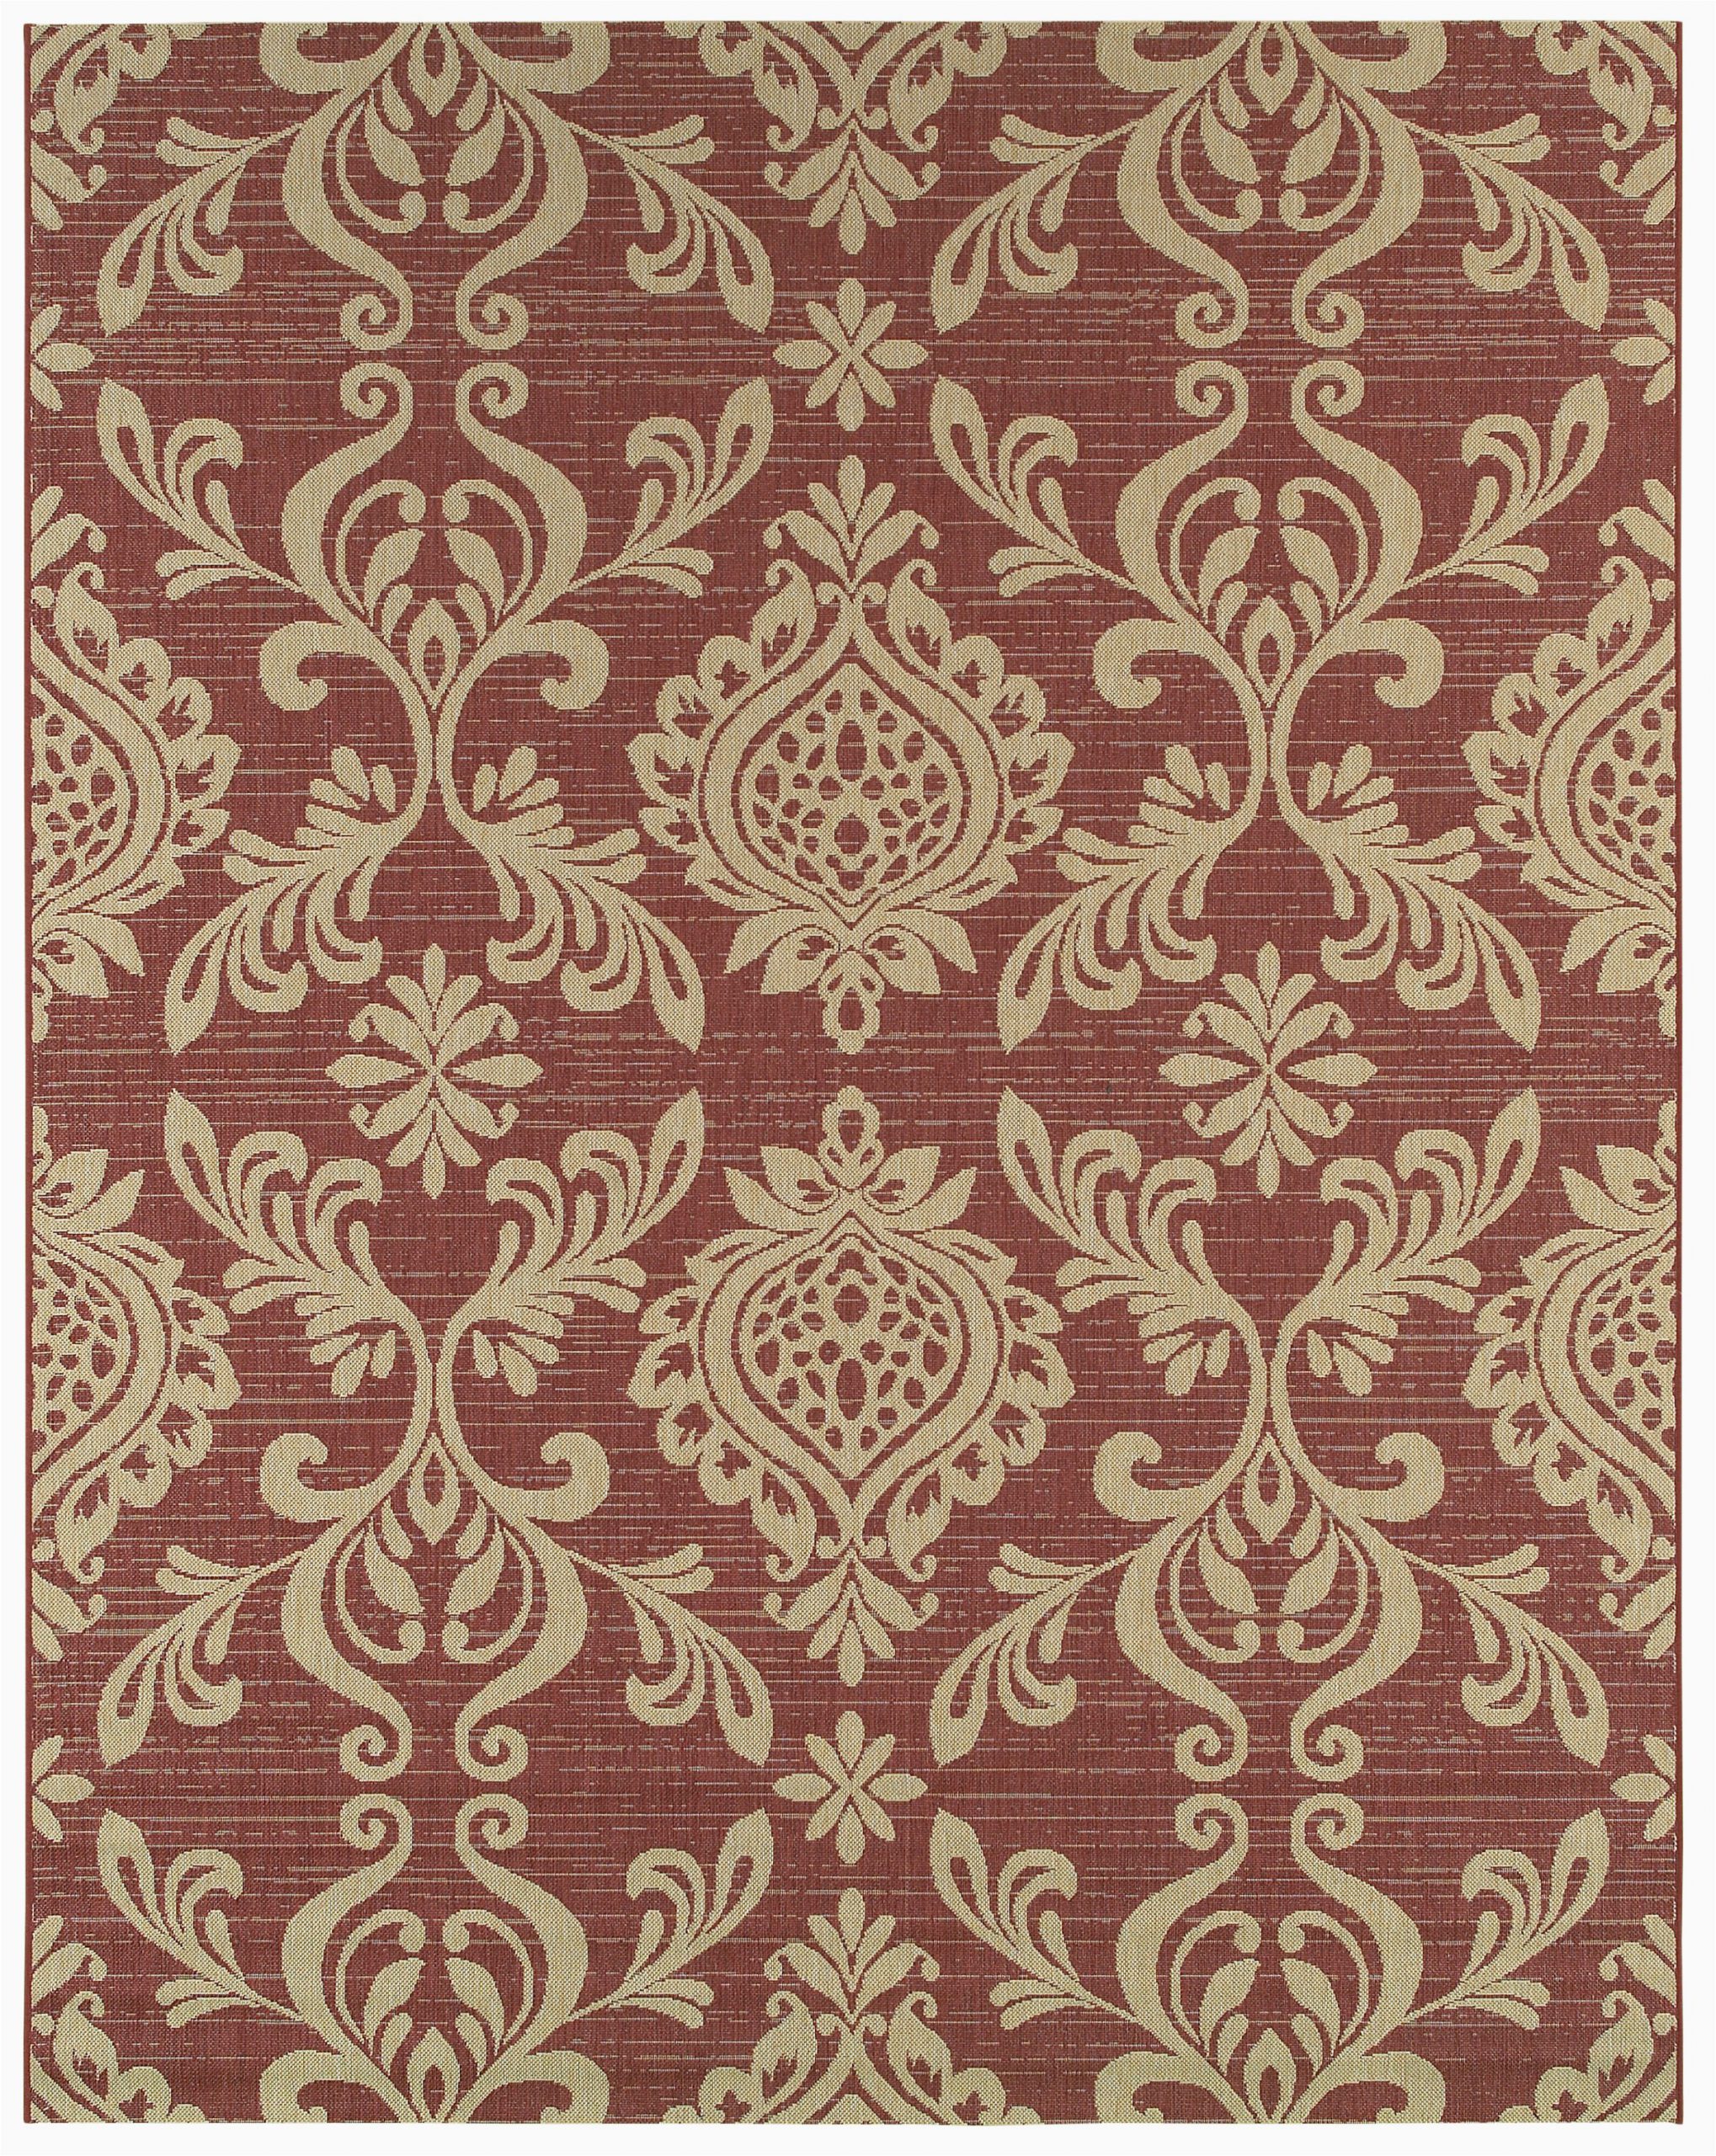 Burgundy and White area Rugs Nickols Classic Scroll Burgundy Indoor Outdoor area Rug